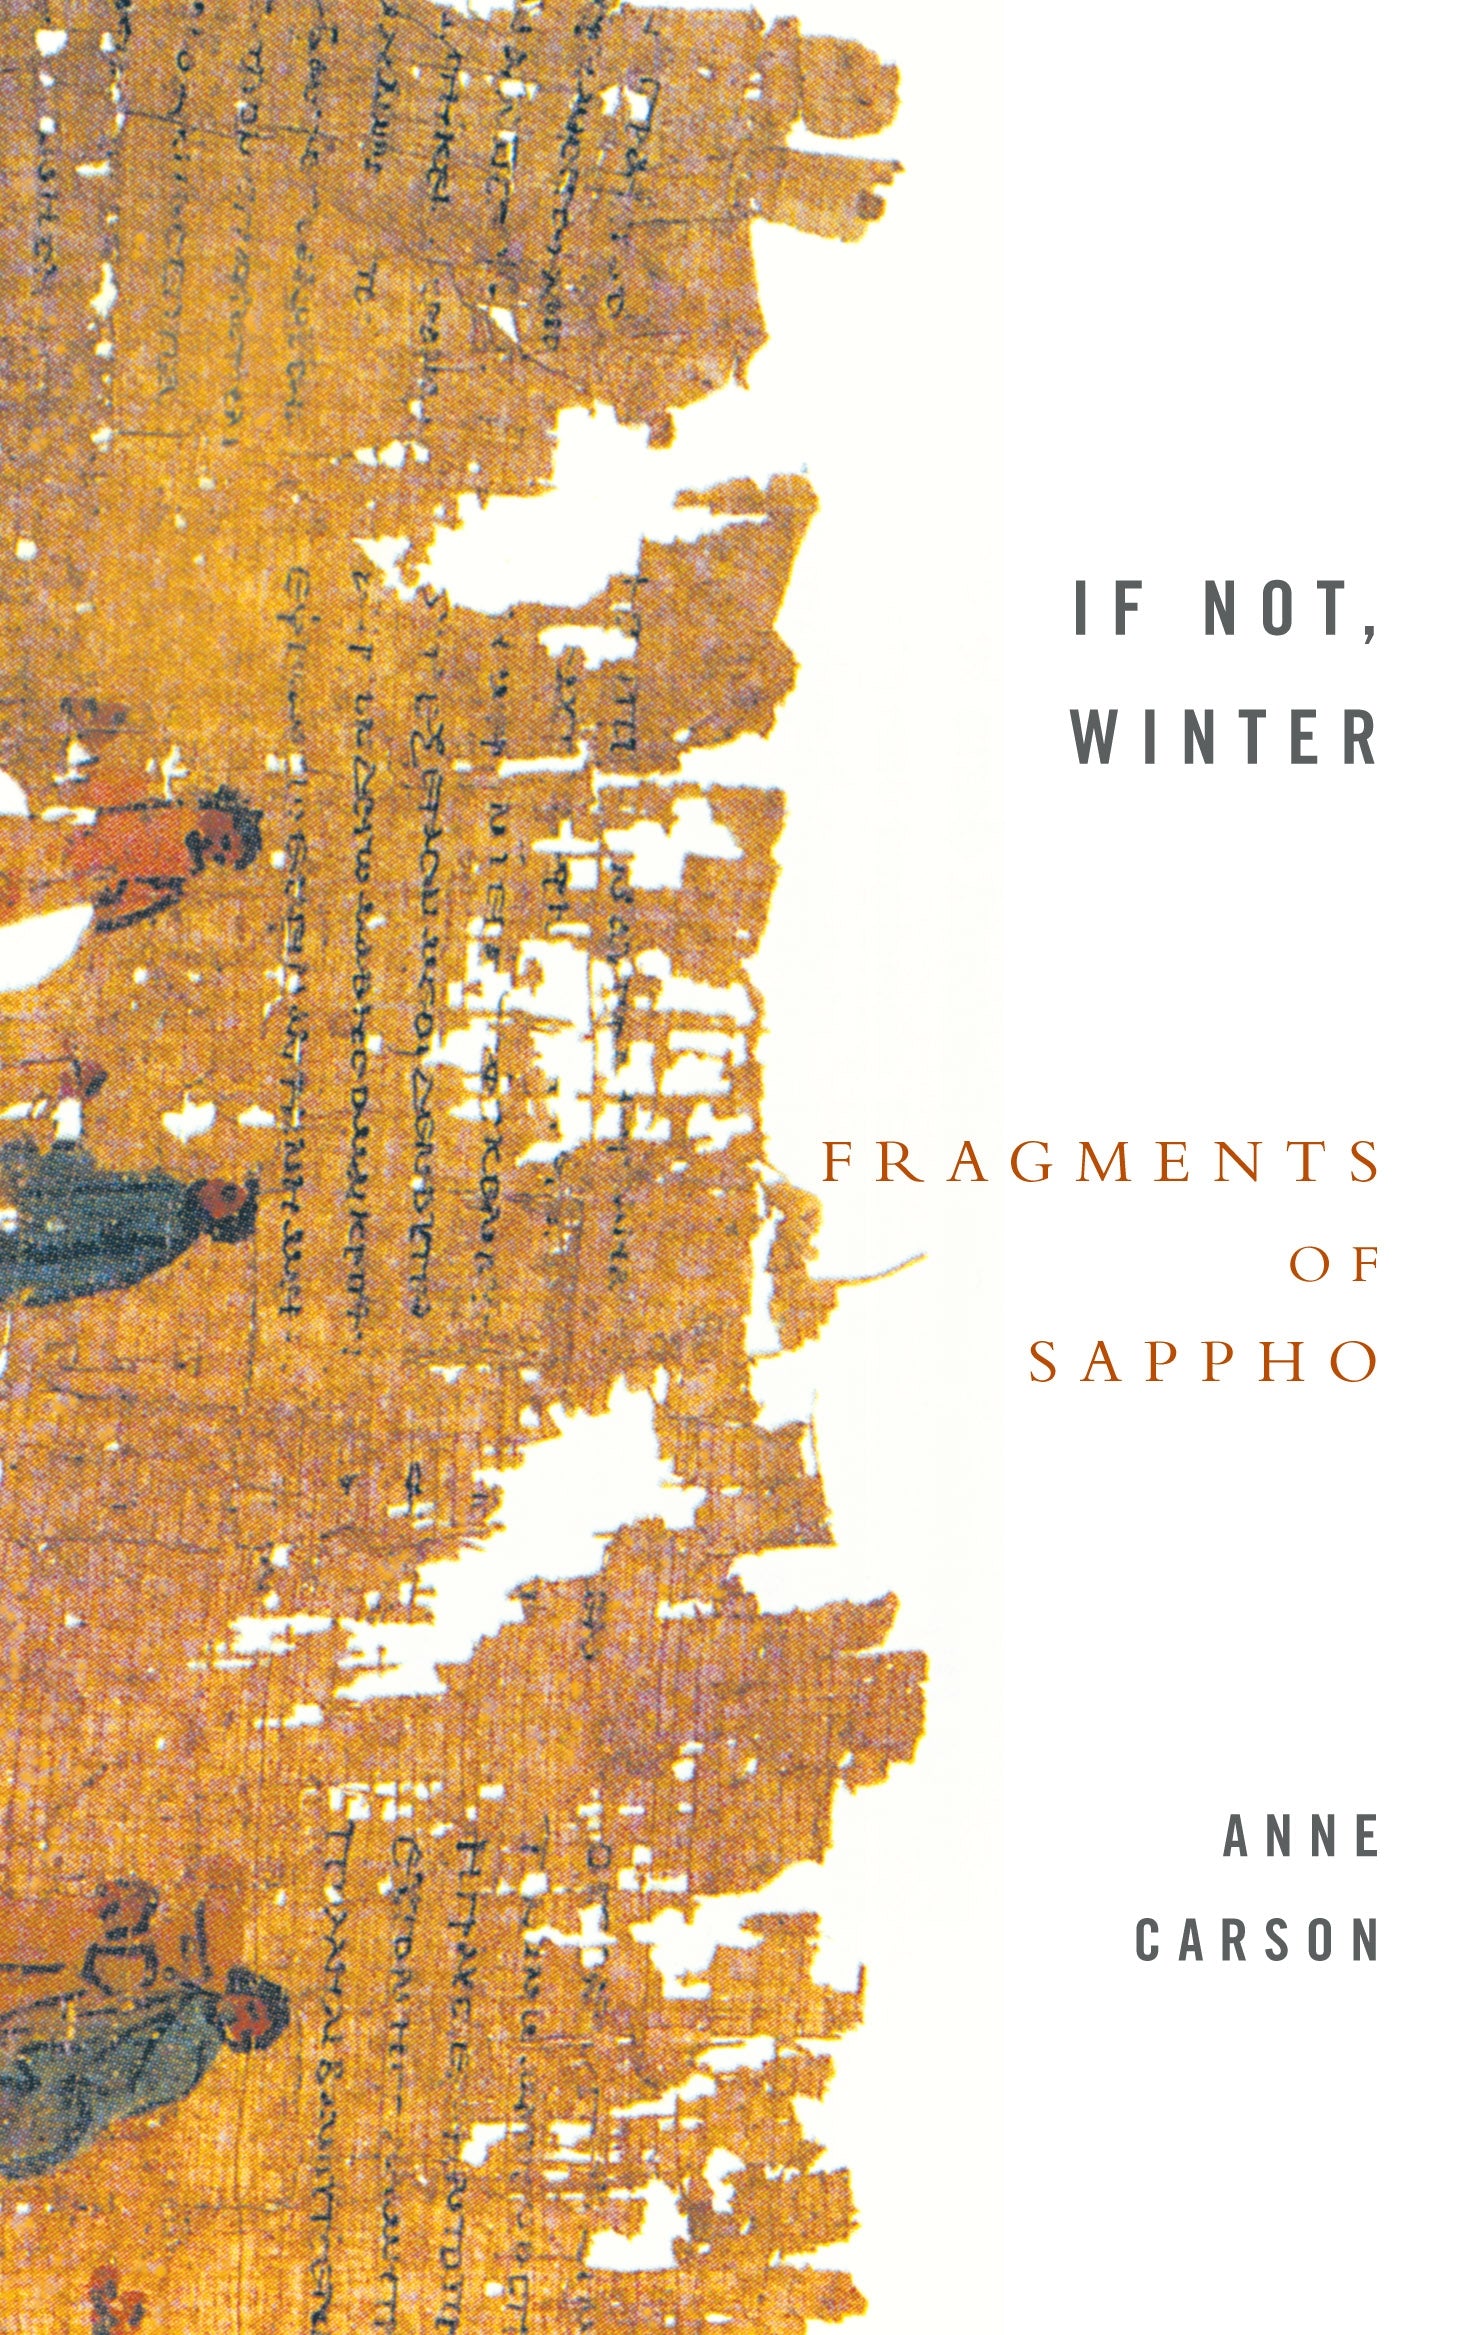 If Not, Winter: Fragments Of Sappho by Anne Carson